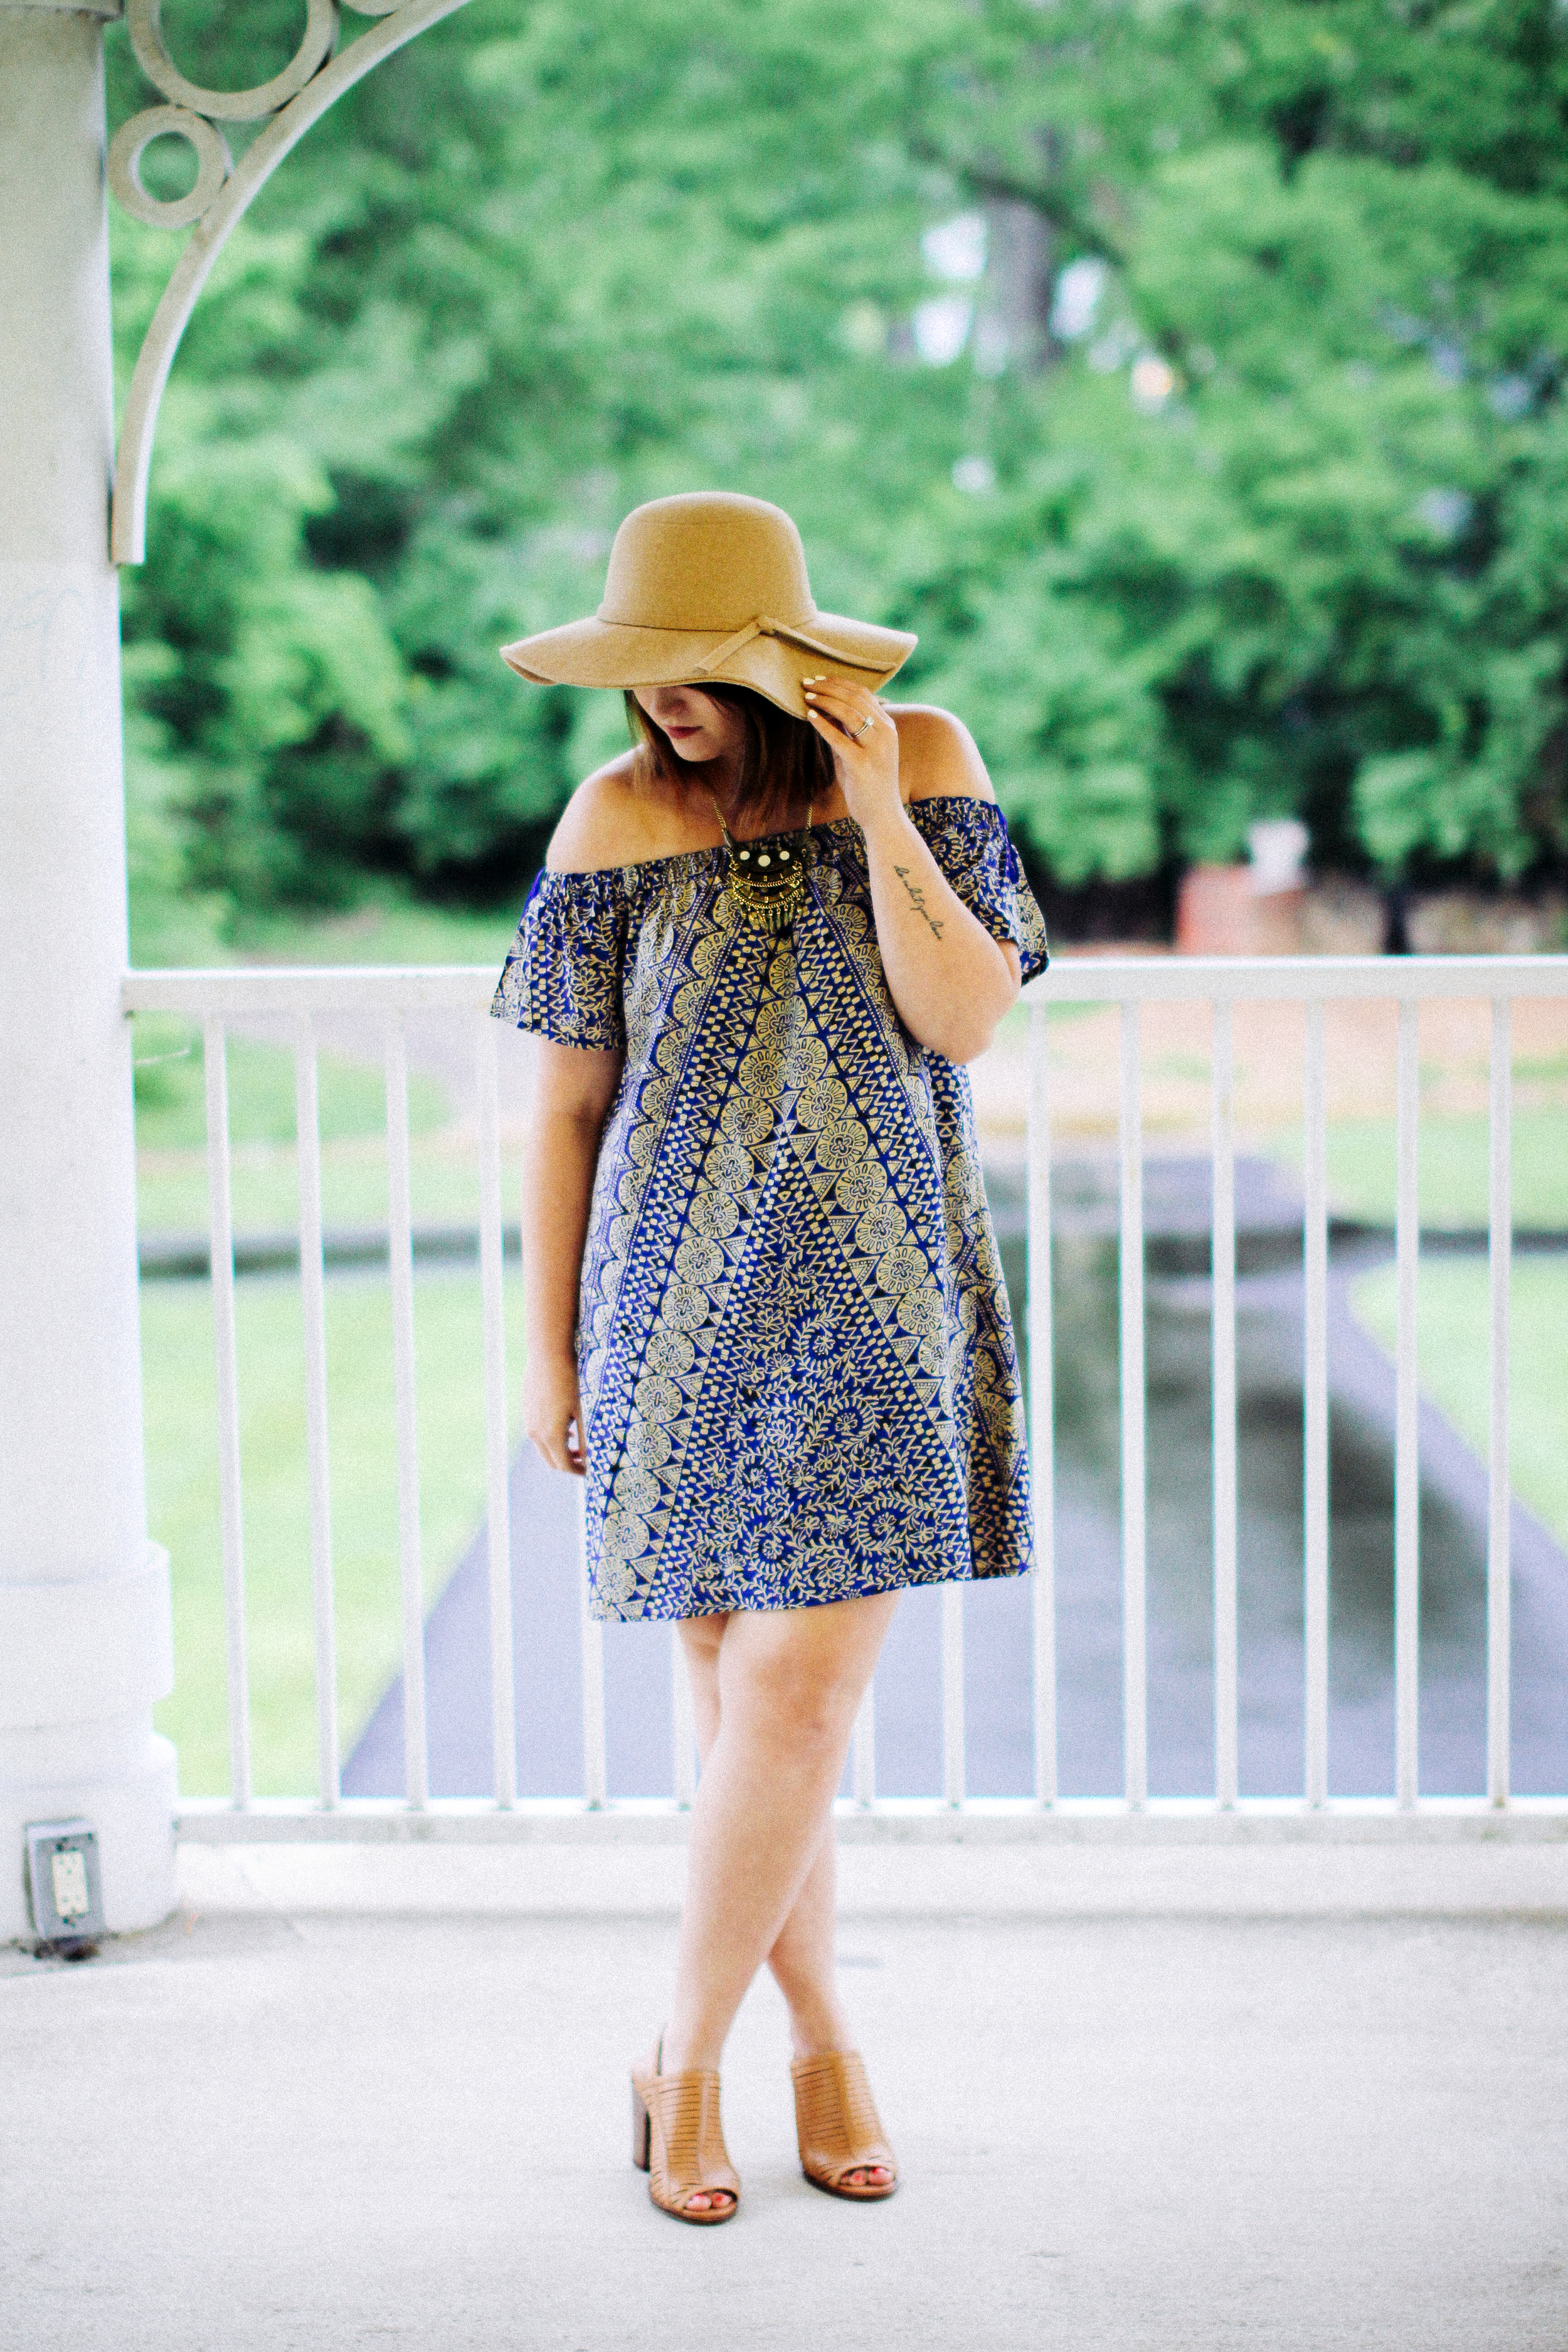 Cold Shoulder Urban Outfitters Dress Summer Style via www.chelceytate.com